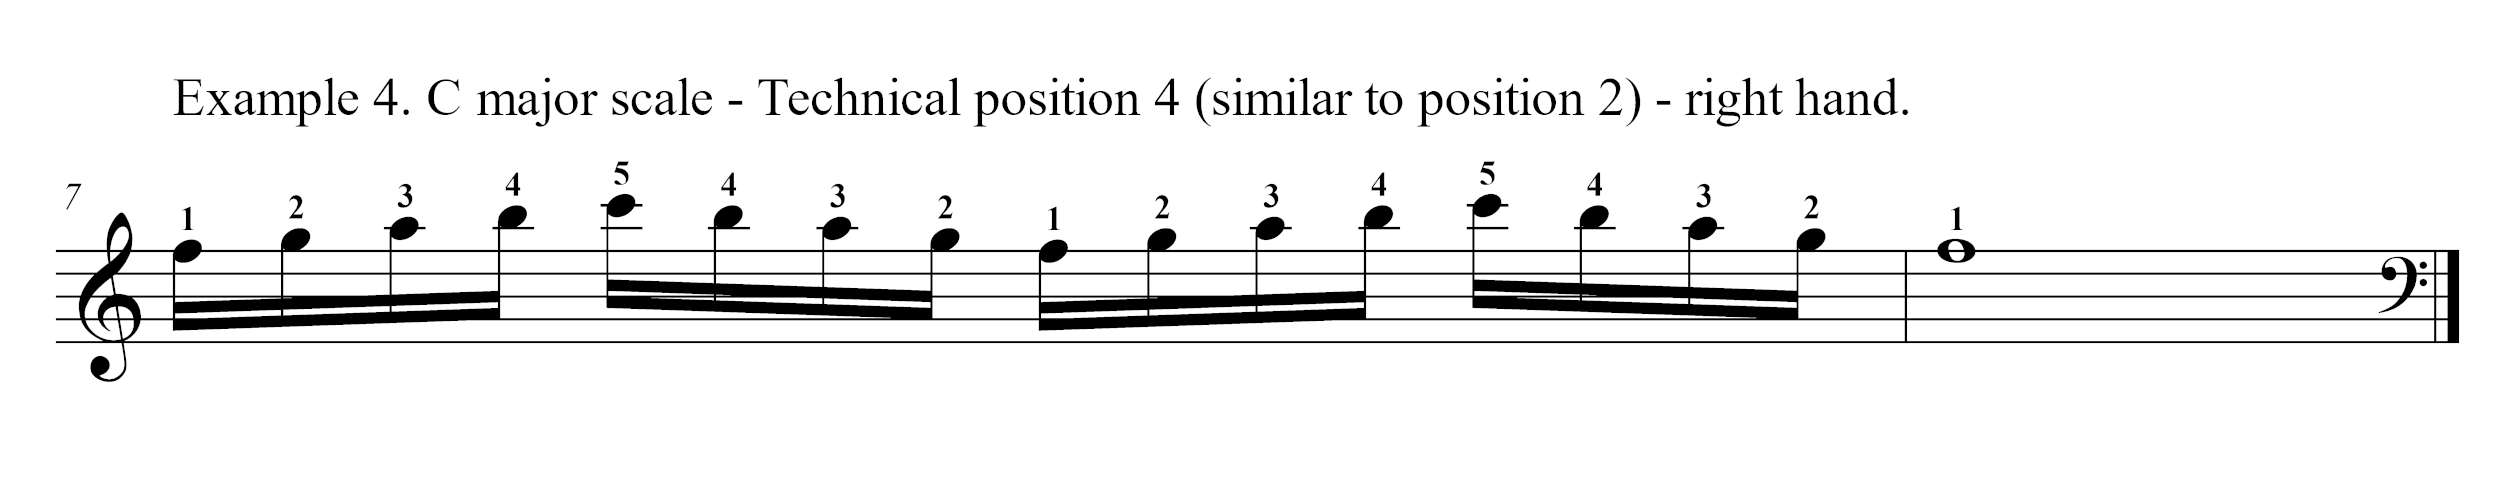 Technical position 4 right hand